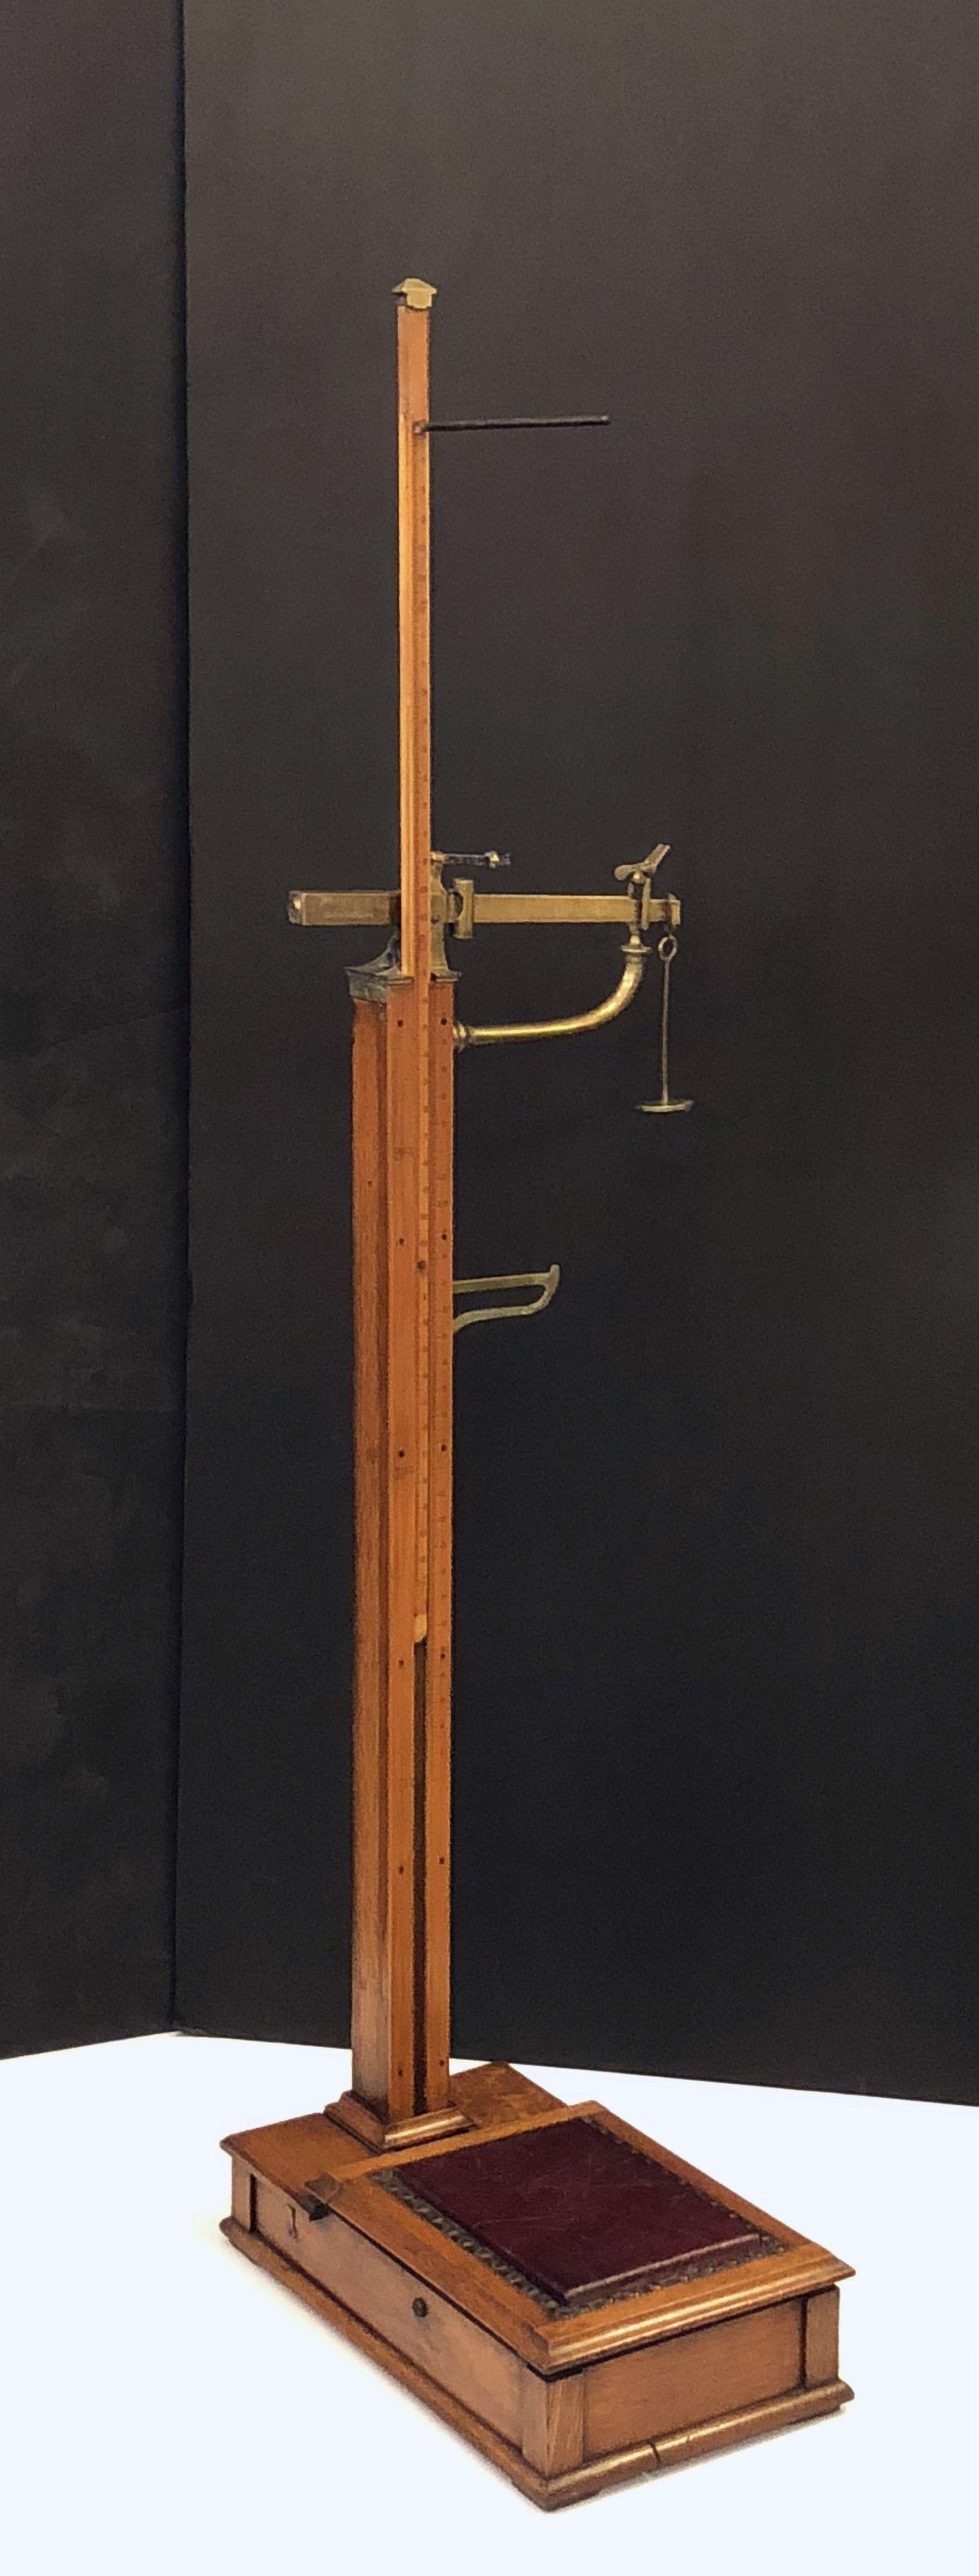 antique standing scale